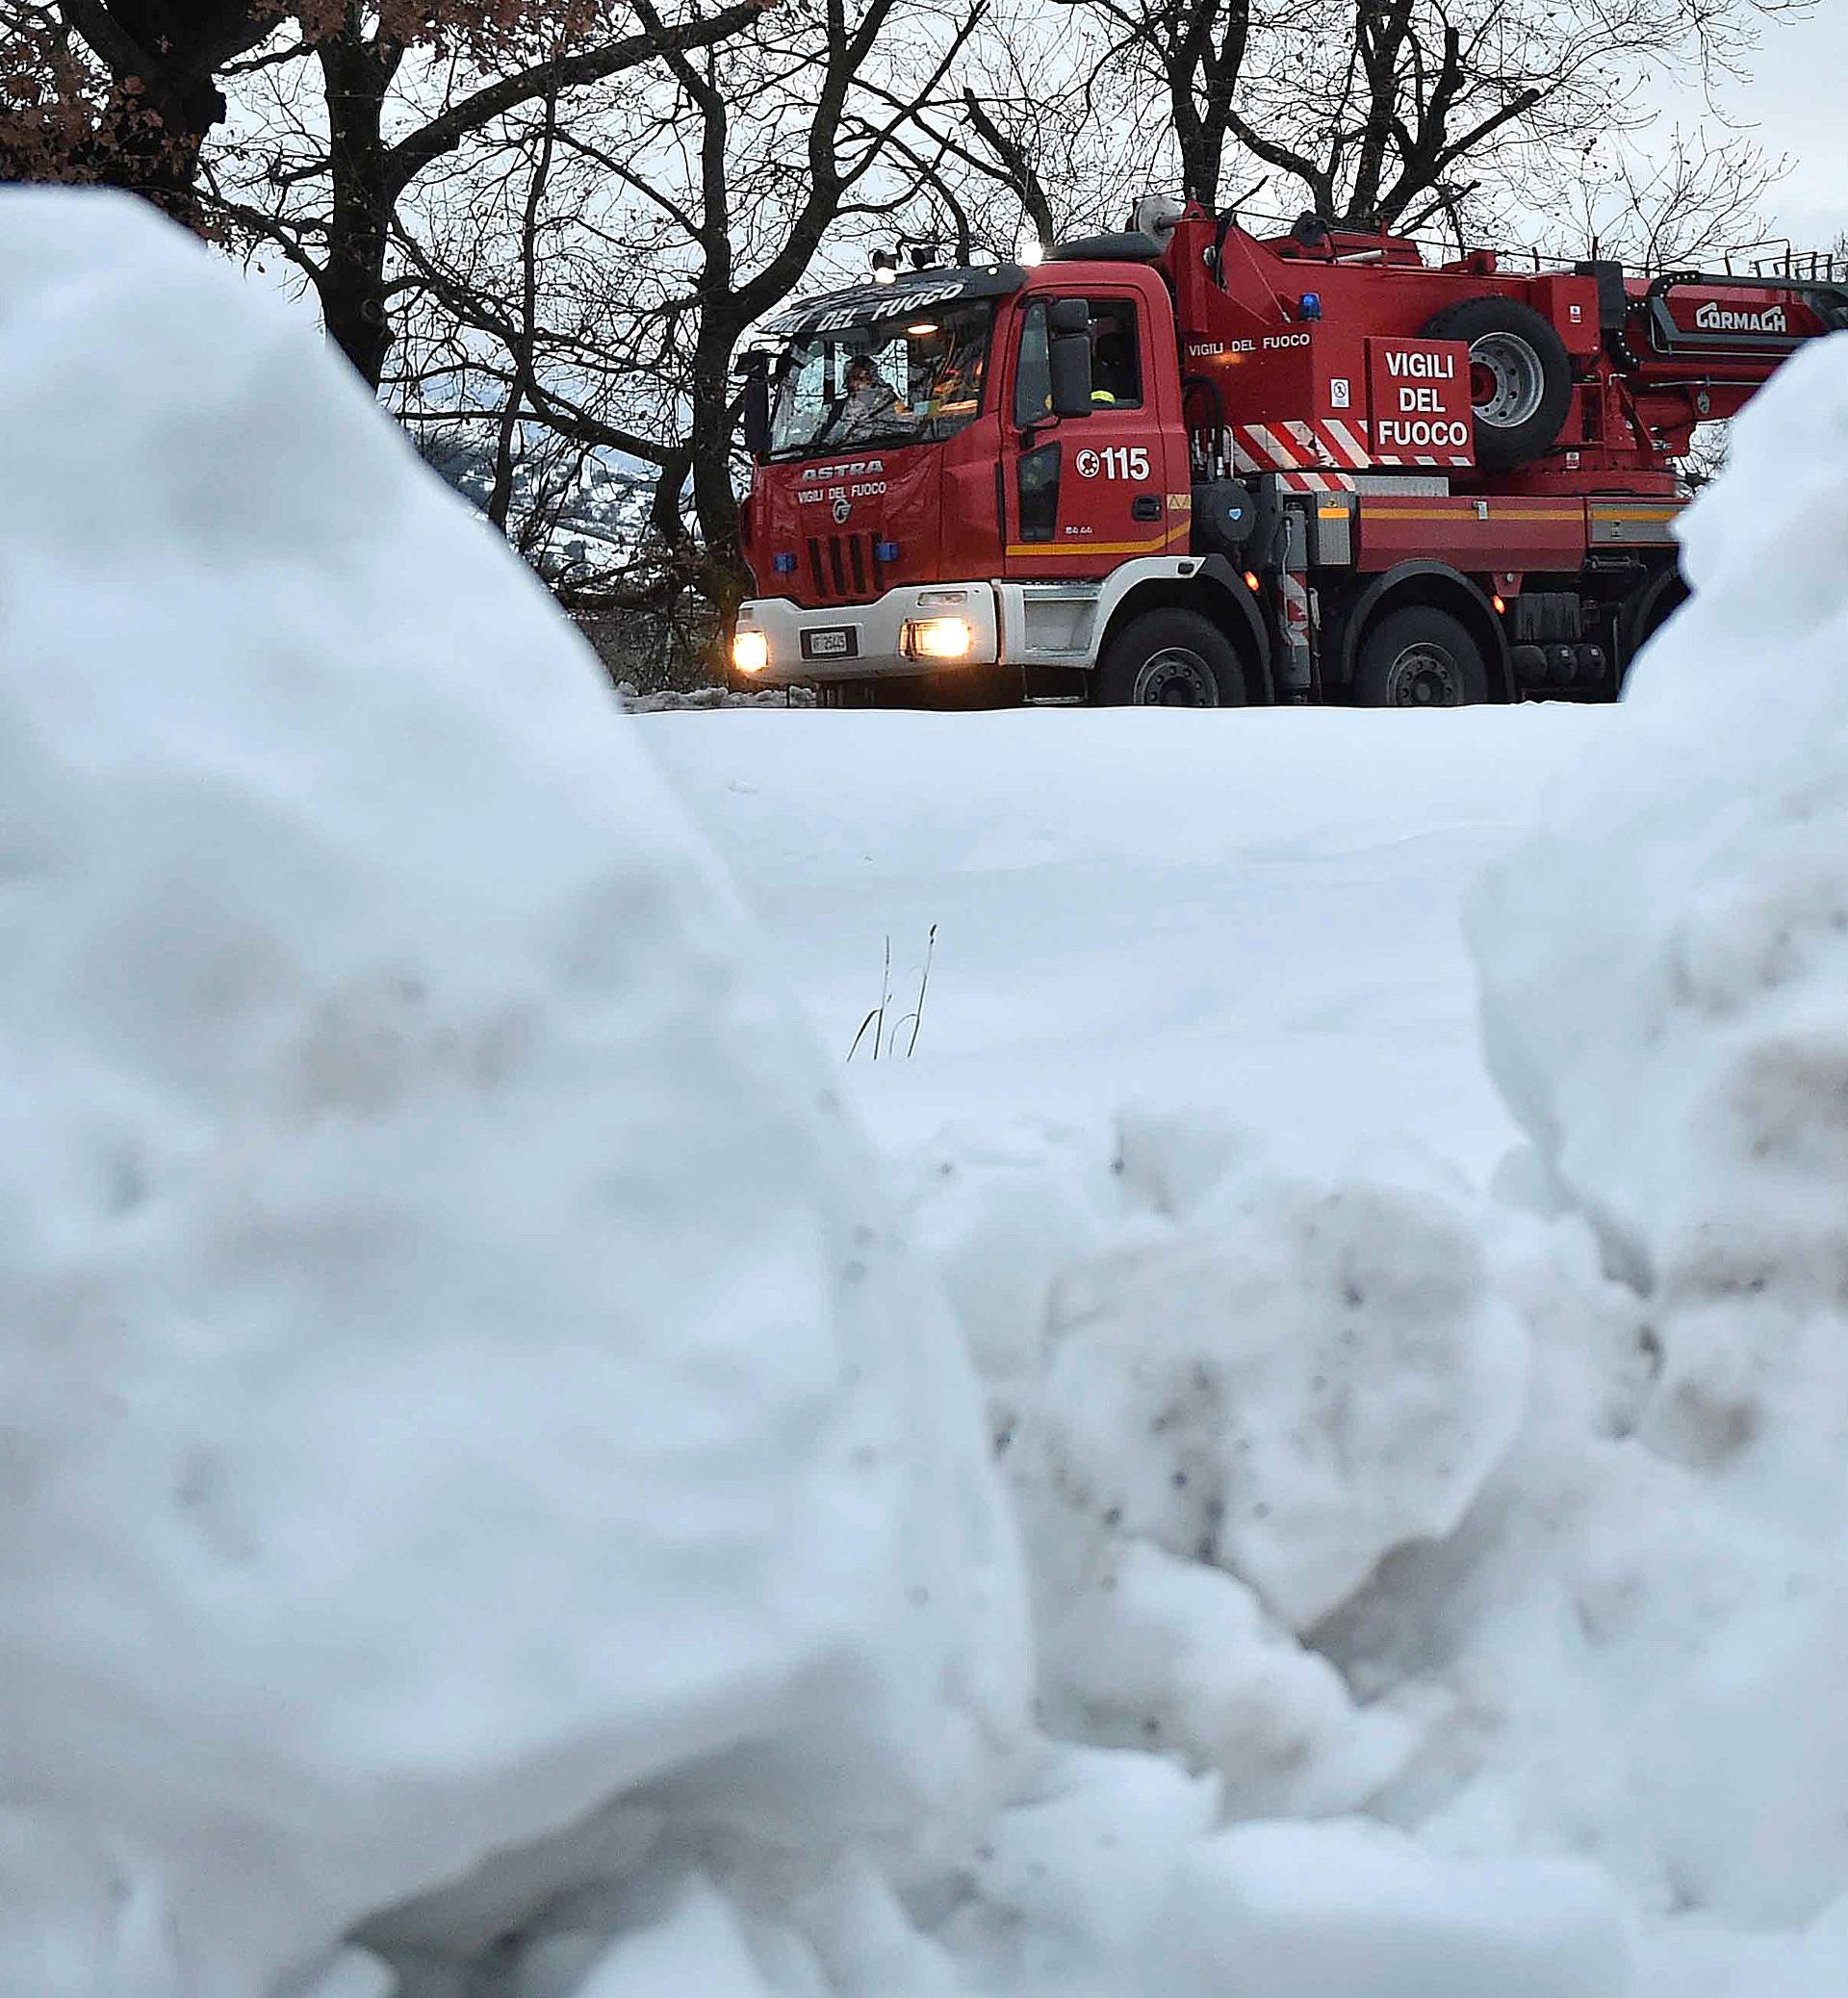 A firefighter truck is seen in the town of Penne, central Italy, following a series of earthquakes and a snow avalanche hitting a hotel in central Italy